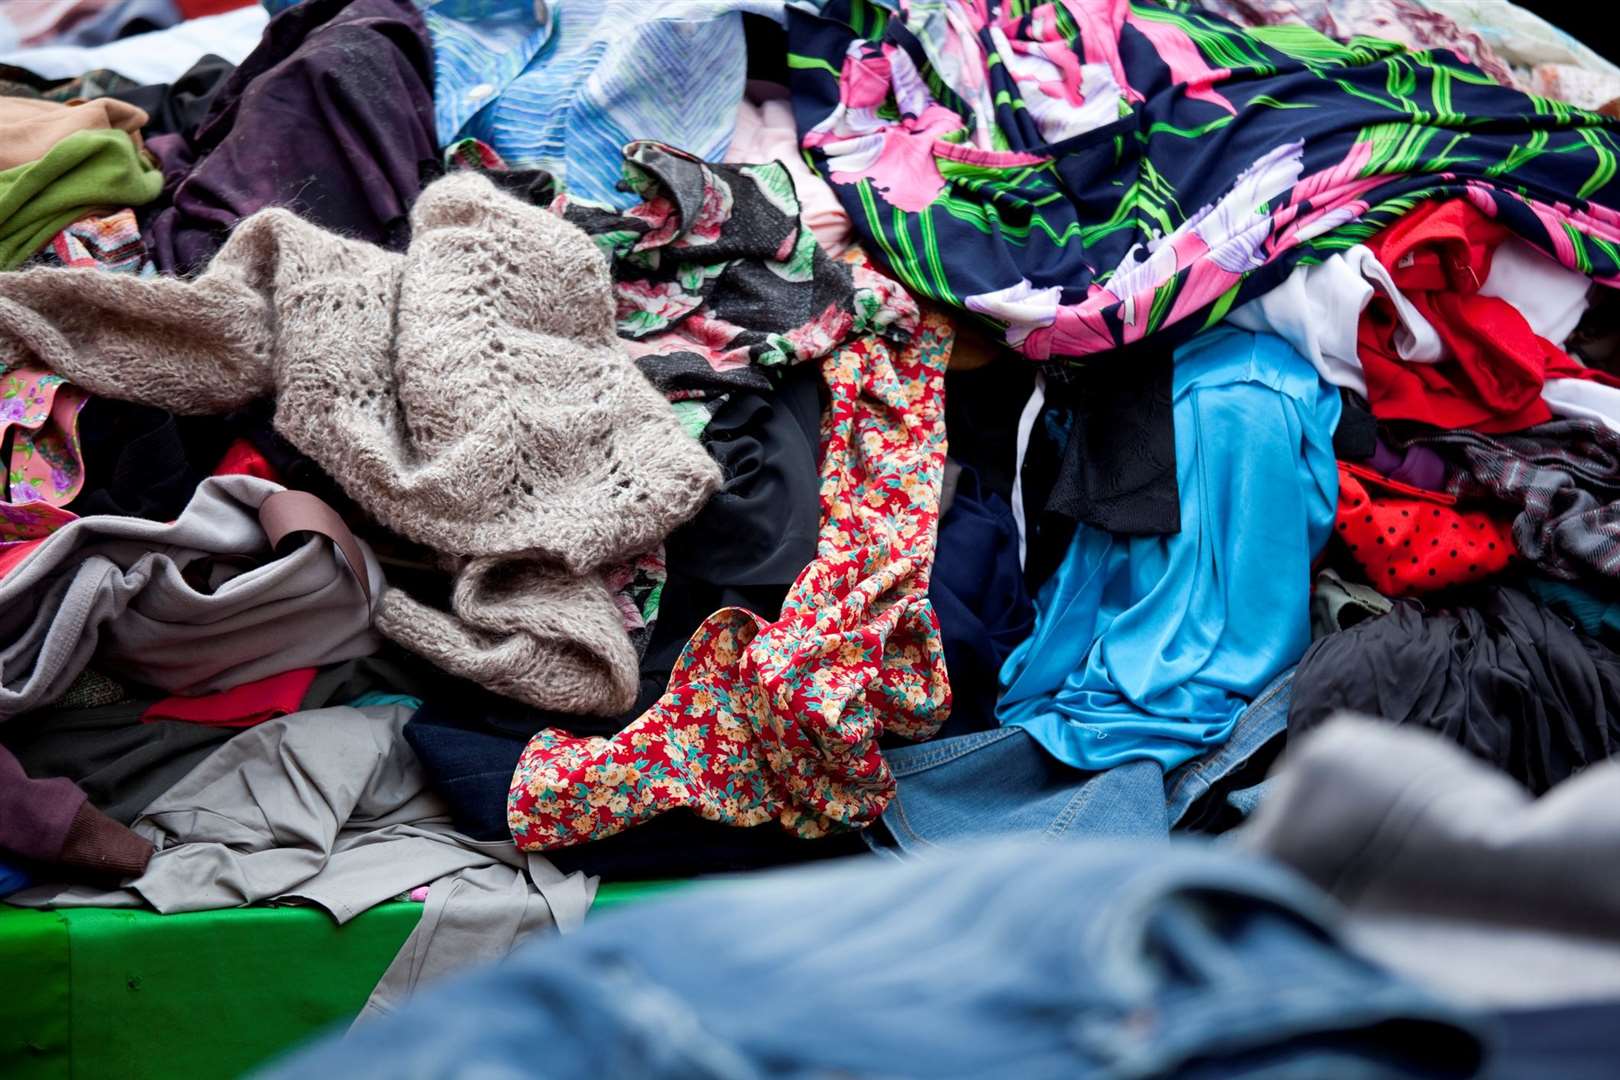 People selling secondhand clothing for a profit may be caught up in the new rules. Image: iStock.